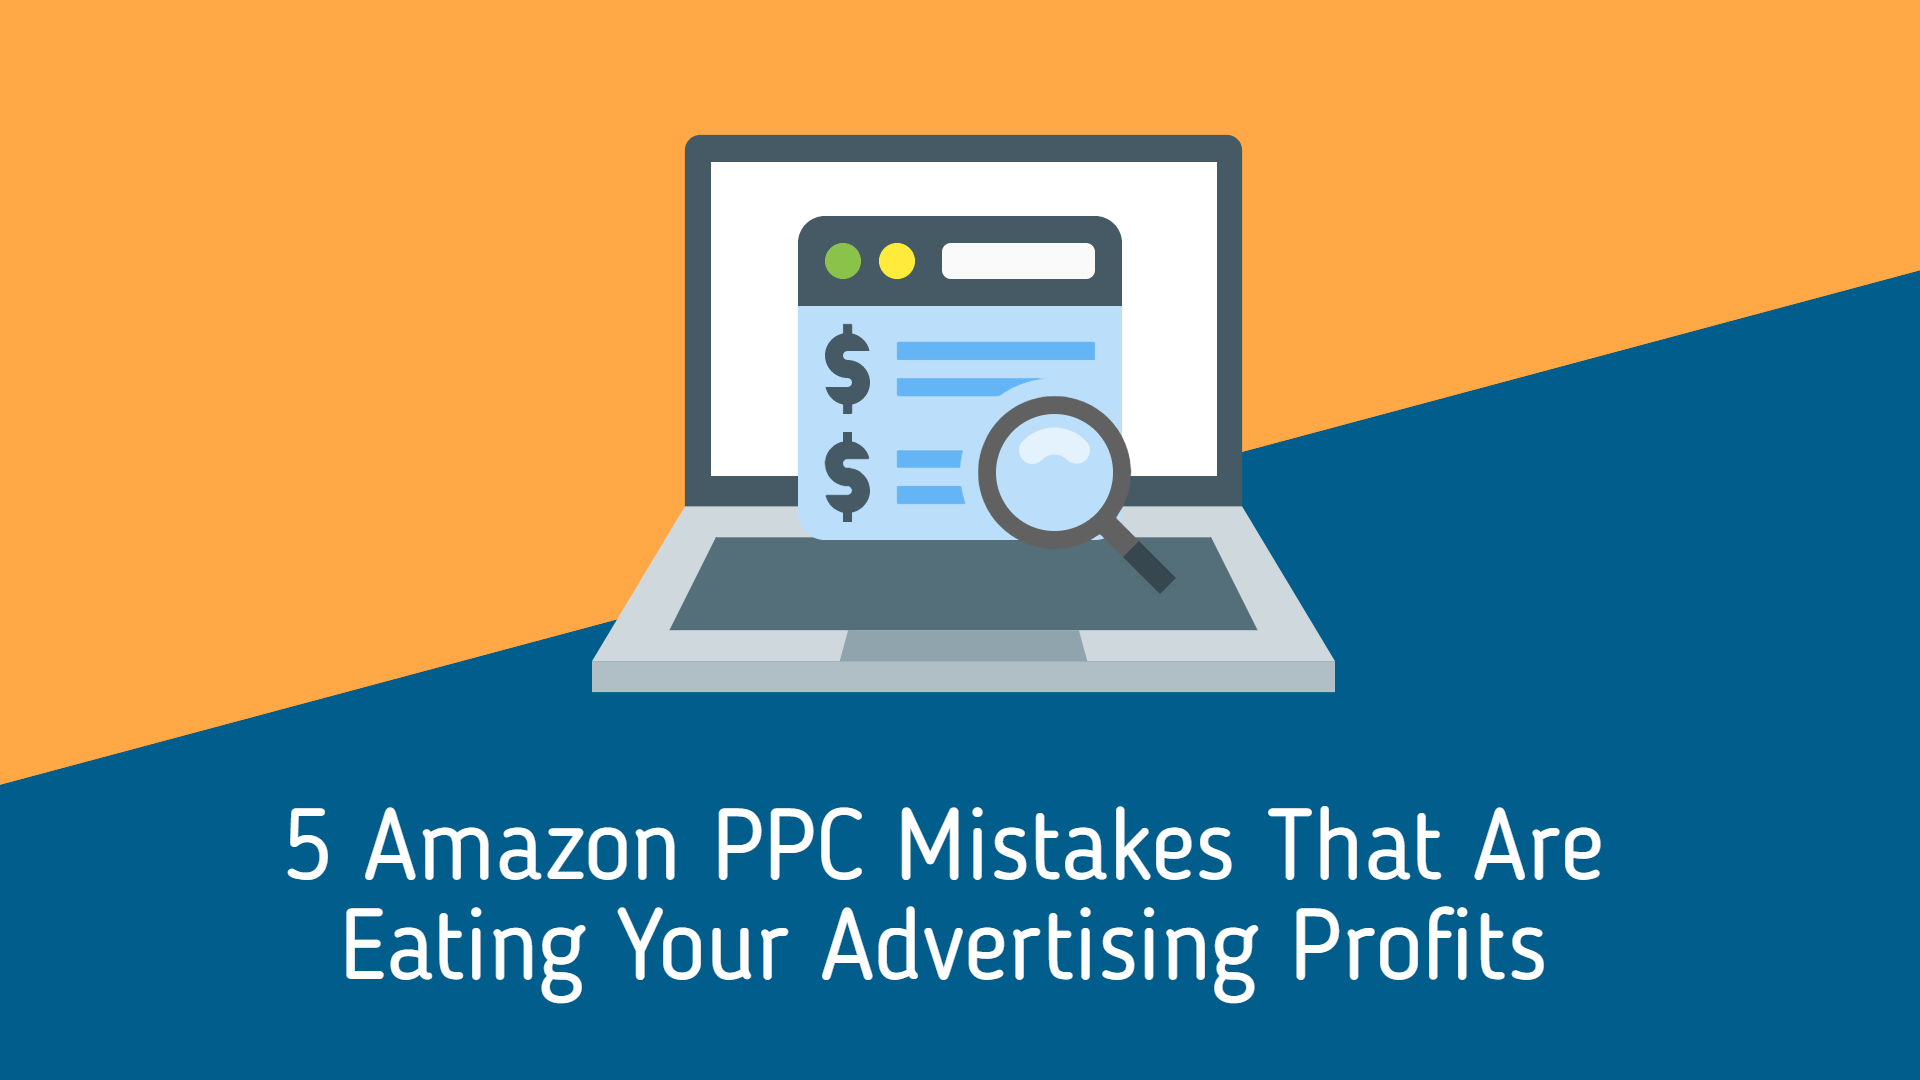 5 Amazon PPC Mistakes That Are Eating Your Advertising Profits